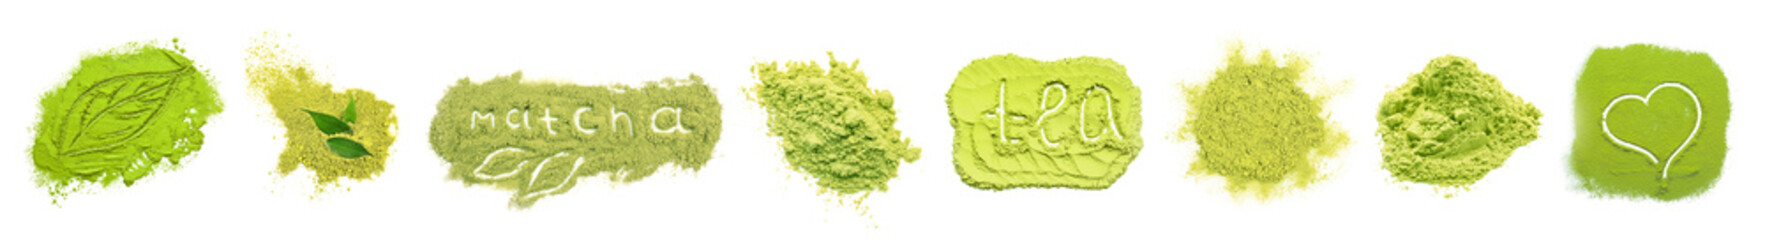 Set of powdered matcha tea on white background, top view